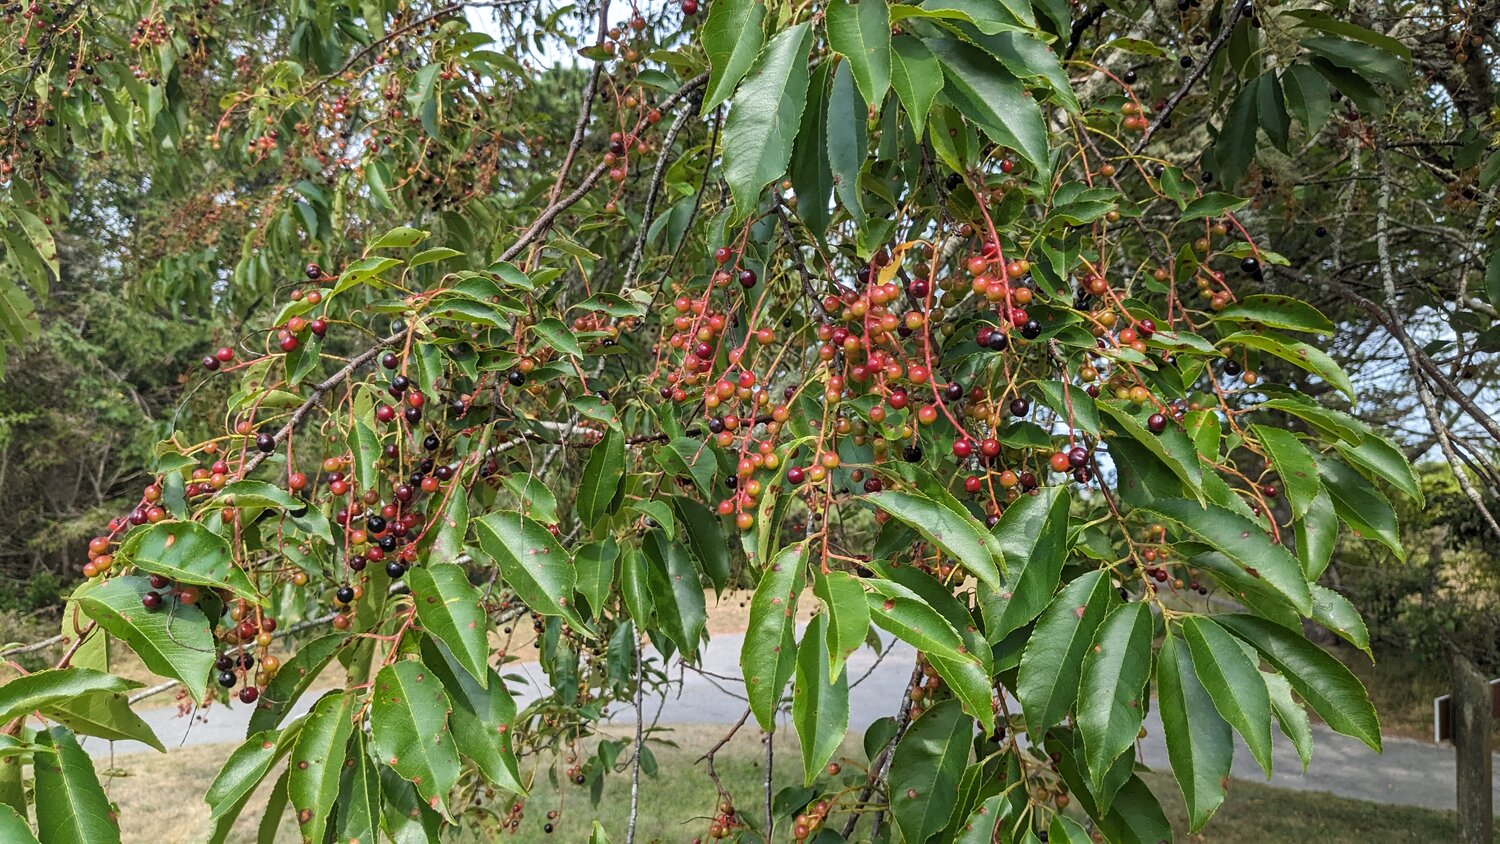 Black cherry trees are heavy with fruit and just starting to ripen in the hot August sun, turning a dark reddish-black.